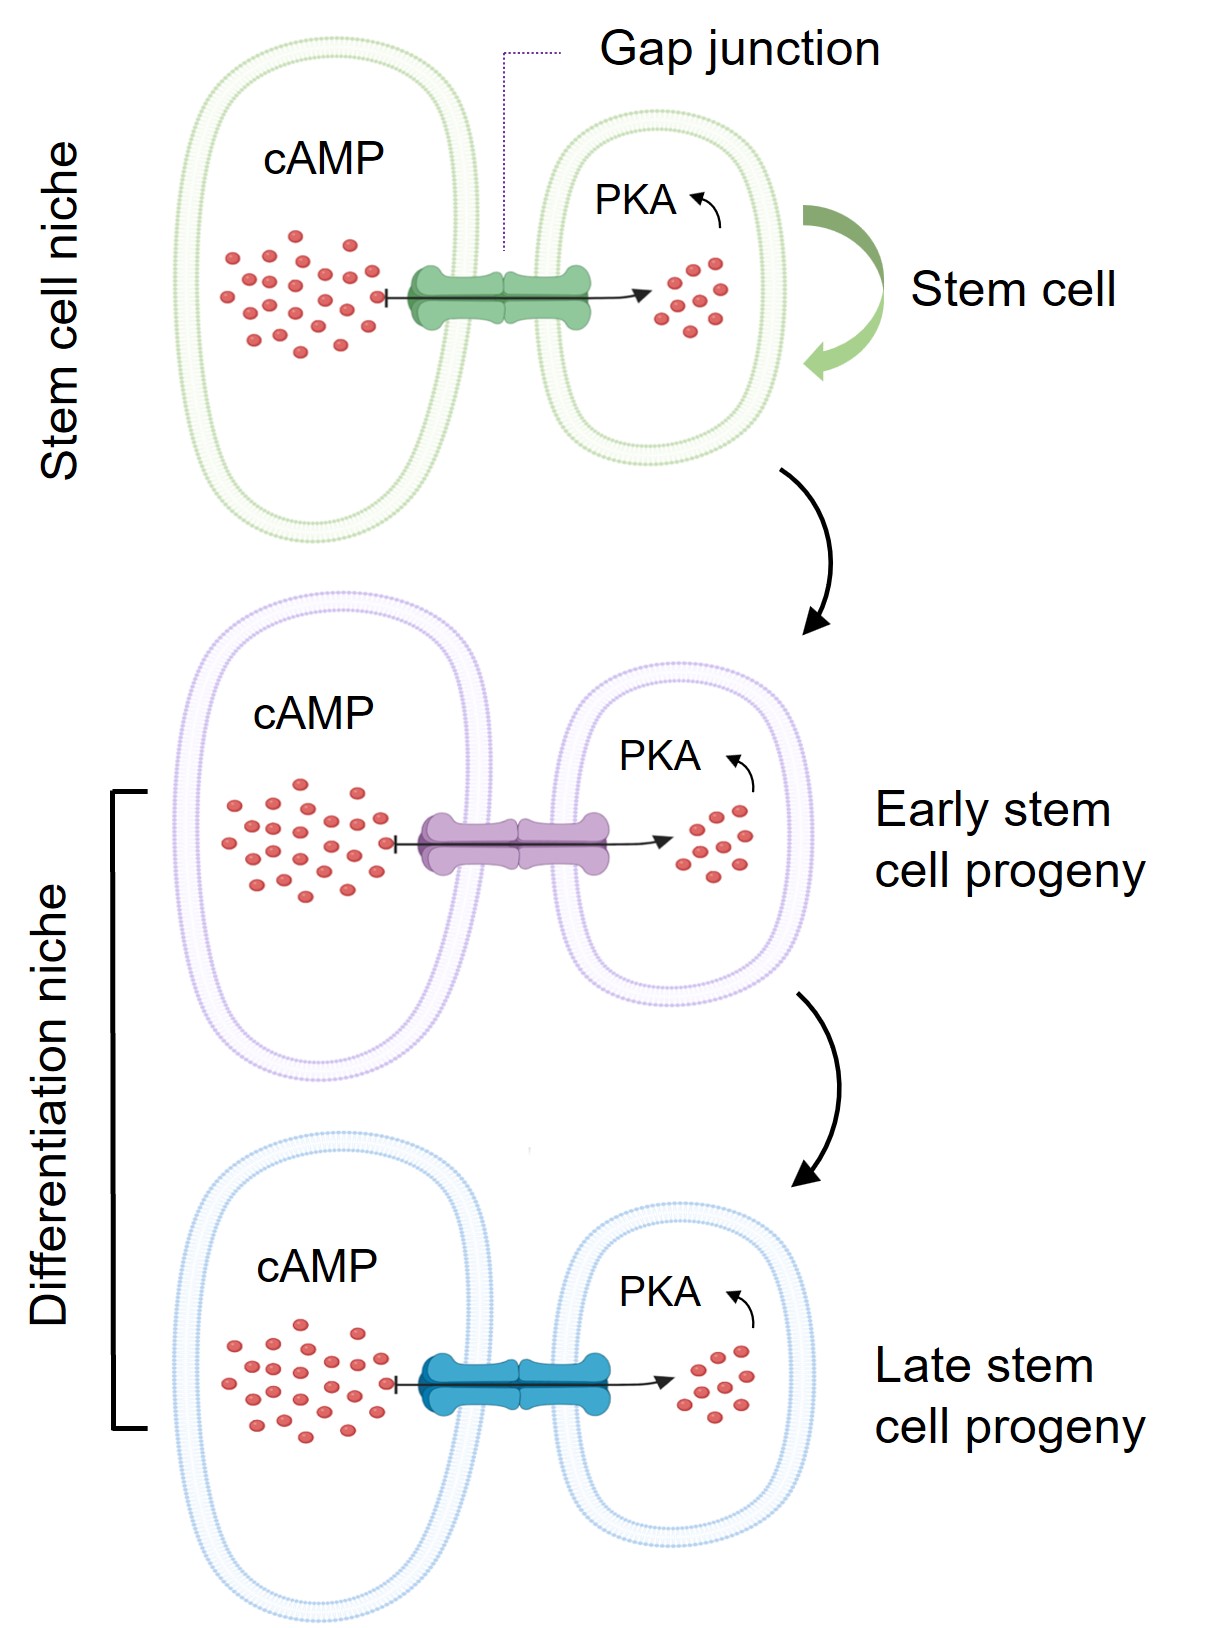 A model of how stem cell niche uses the protein channels “Gap junctions” to transport its cAMP into stem cell progeny in controlling their differentiation into functional cells.